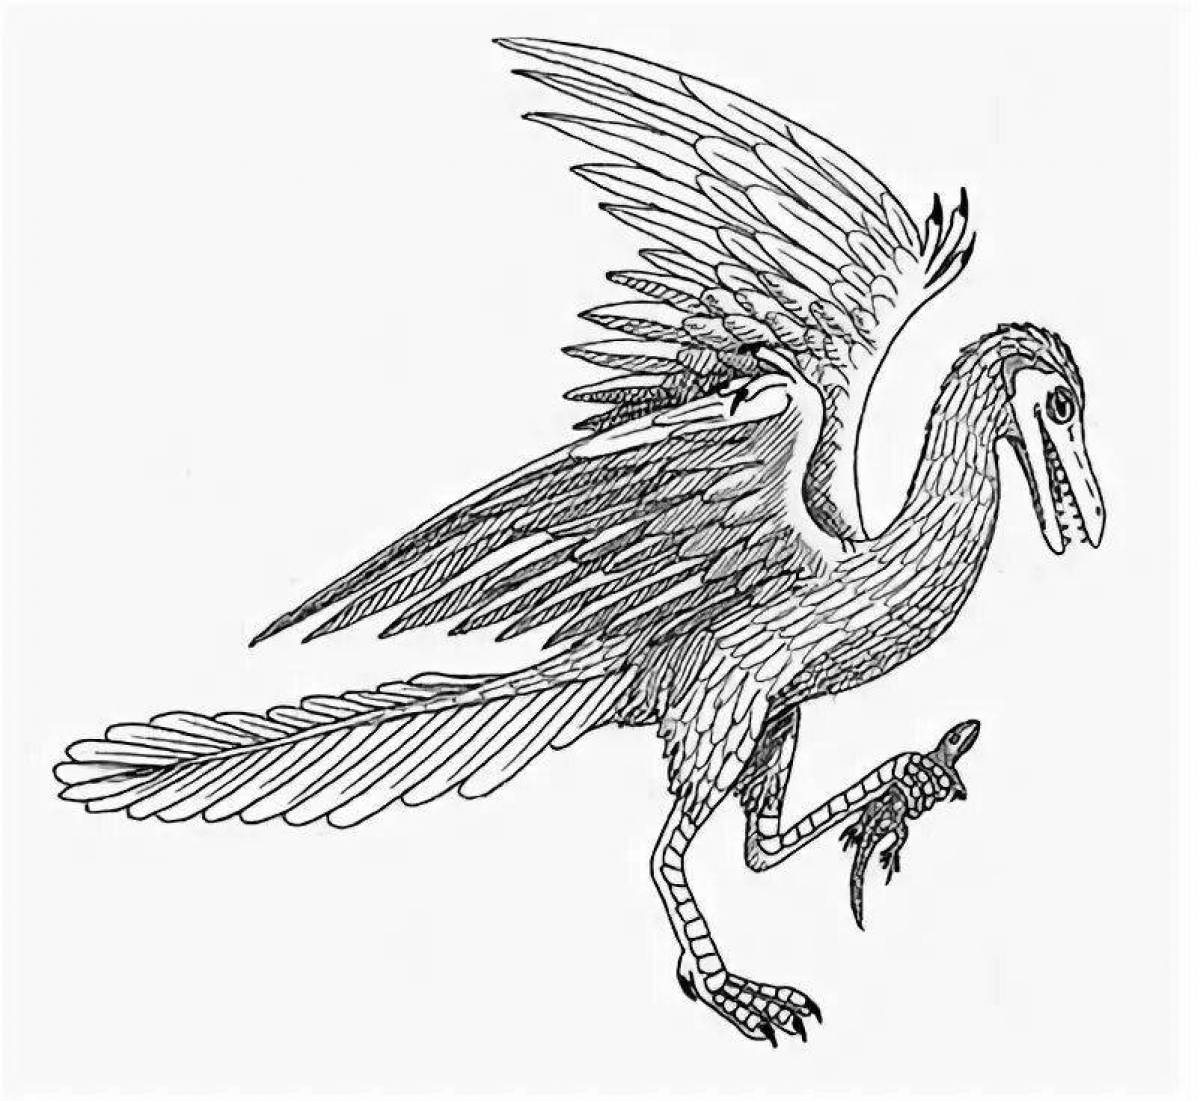 Charming Archeopteryx coloring book